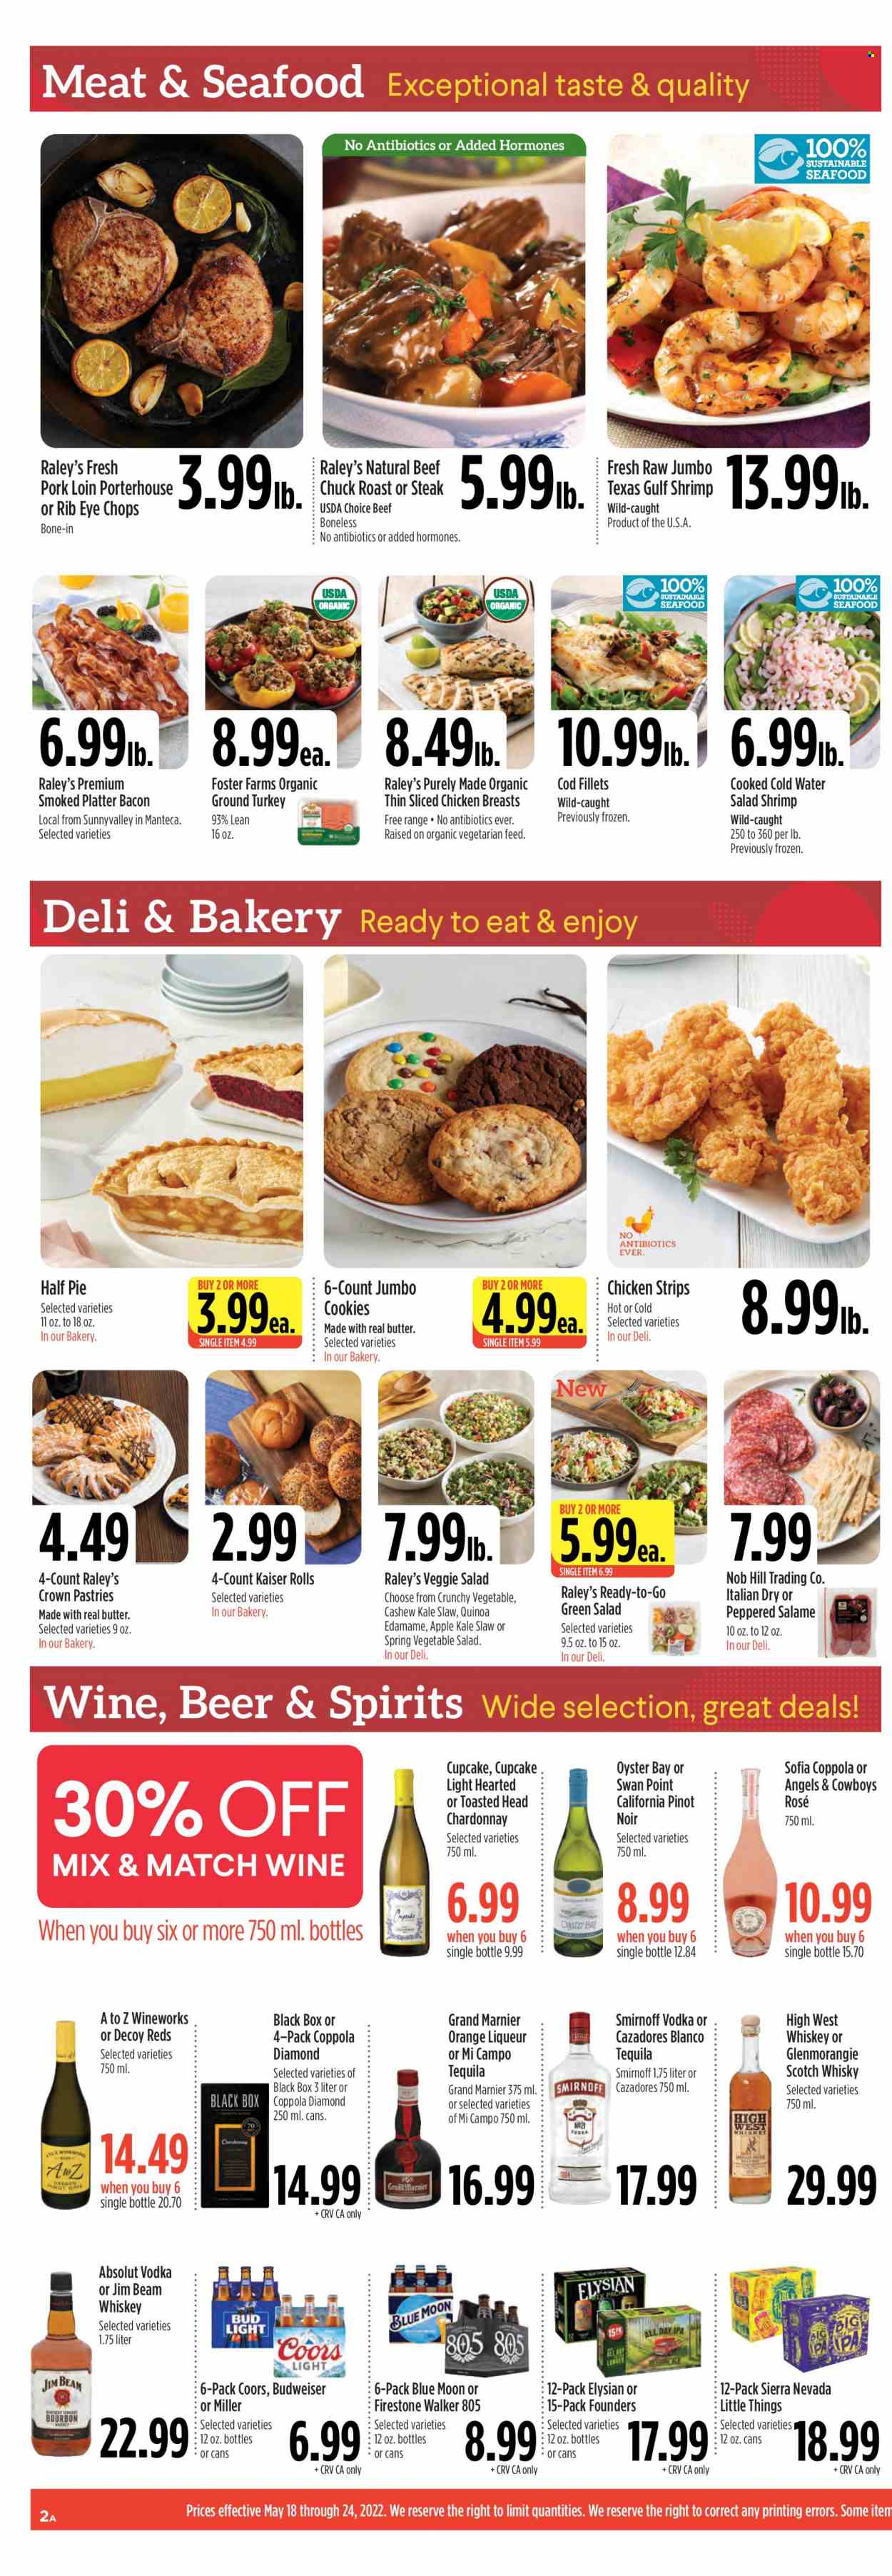 thumbnail - Raley's Flyer - 05/18/2022 - 05/24/2022 - Sales products - pie, cupcake, kale, oranges, cod, oysters, shrimps, bacon, butter, strips, chicken strips, cookies, quinoa, red wine, white wine, Chardonnay, Pinot Noir, rosé wine, bourbon, Grand Marnier, liqueur, Smirnoff, tequila, vodka, whiskey, Absolut, Jim Beam, scotch whisky, whisky, beer, Bud Light, Miller, IPA, Firestone Walker, ground turkey, chicken breasts, beef meat, steak, chuck roast, pork loin, pork meat, Budweiser, Coors, Blue Moon. Page 2.